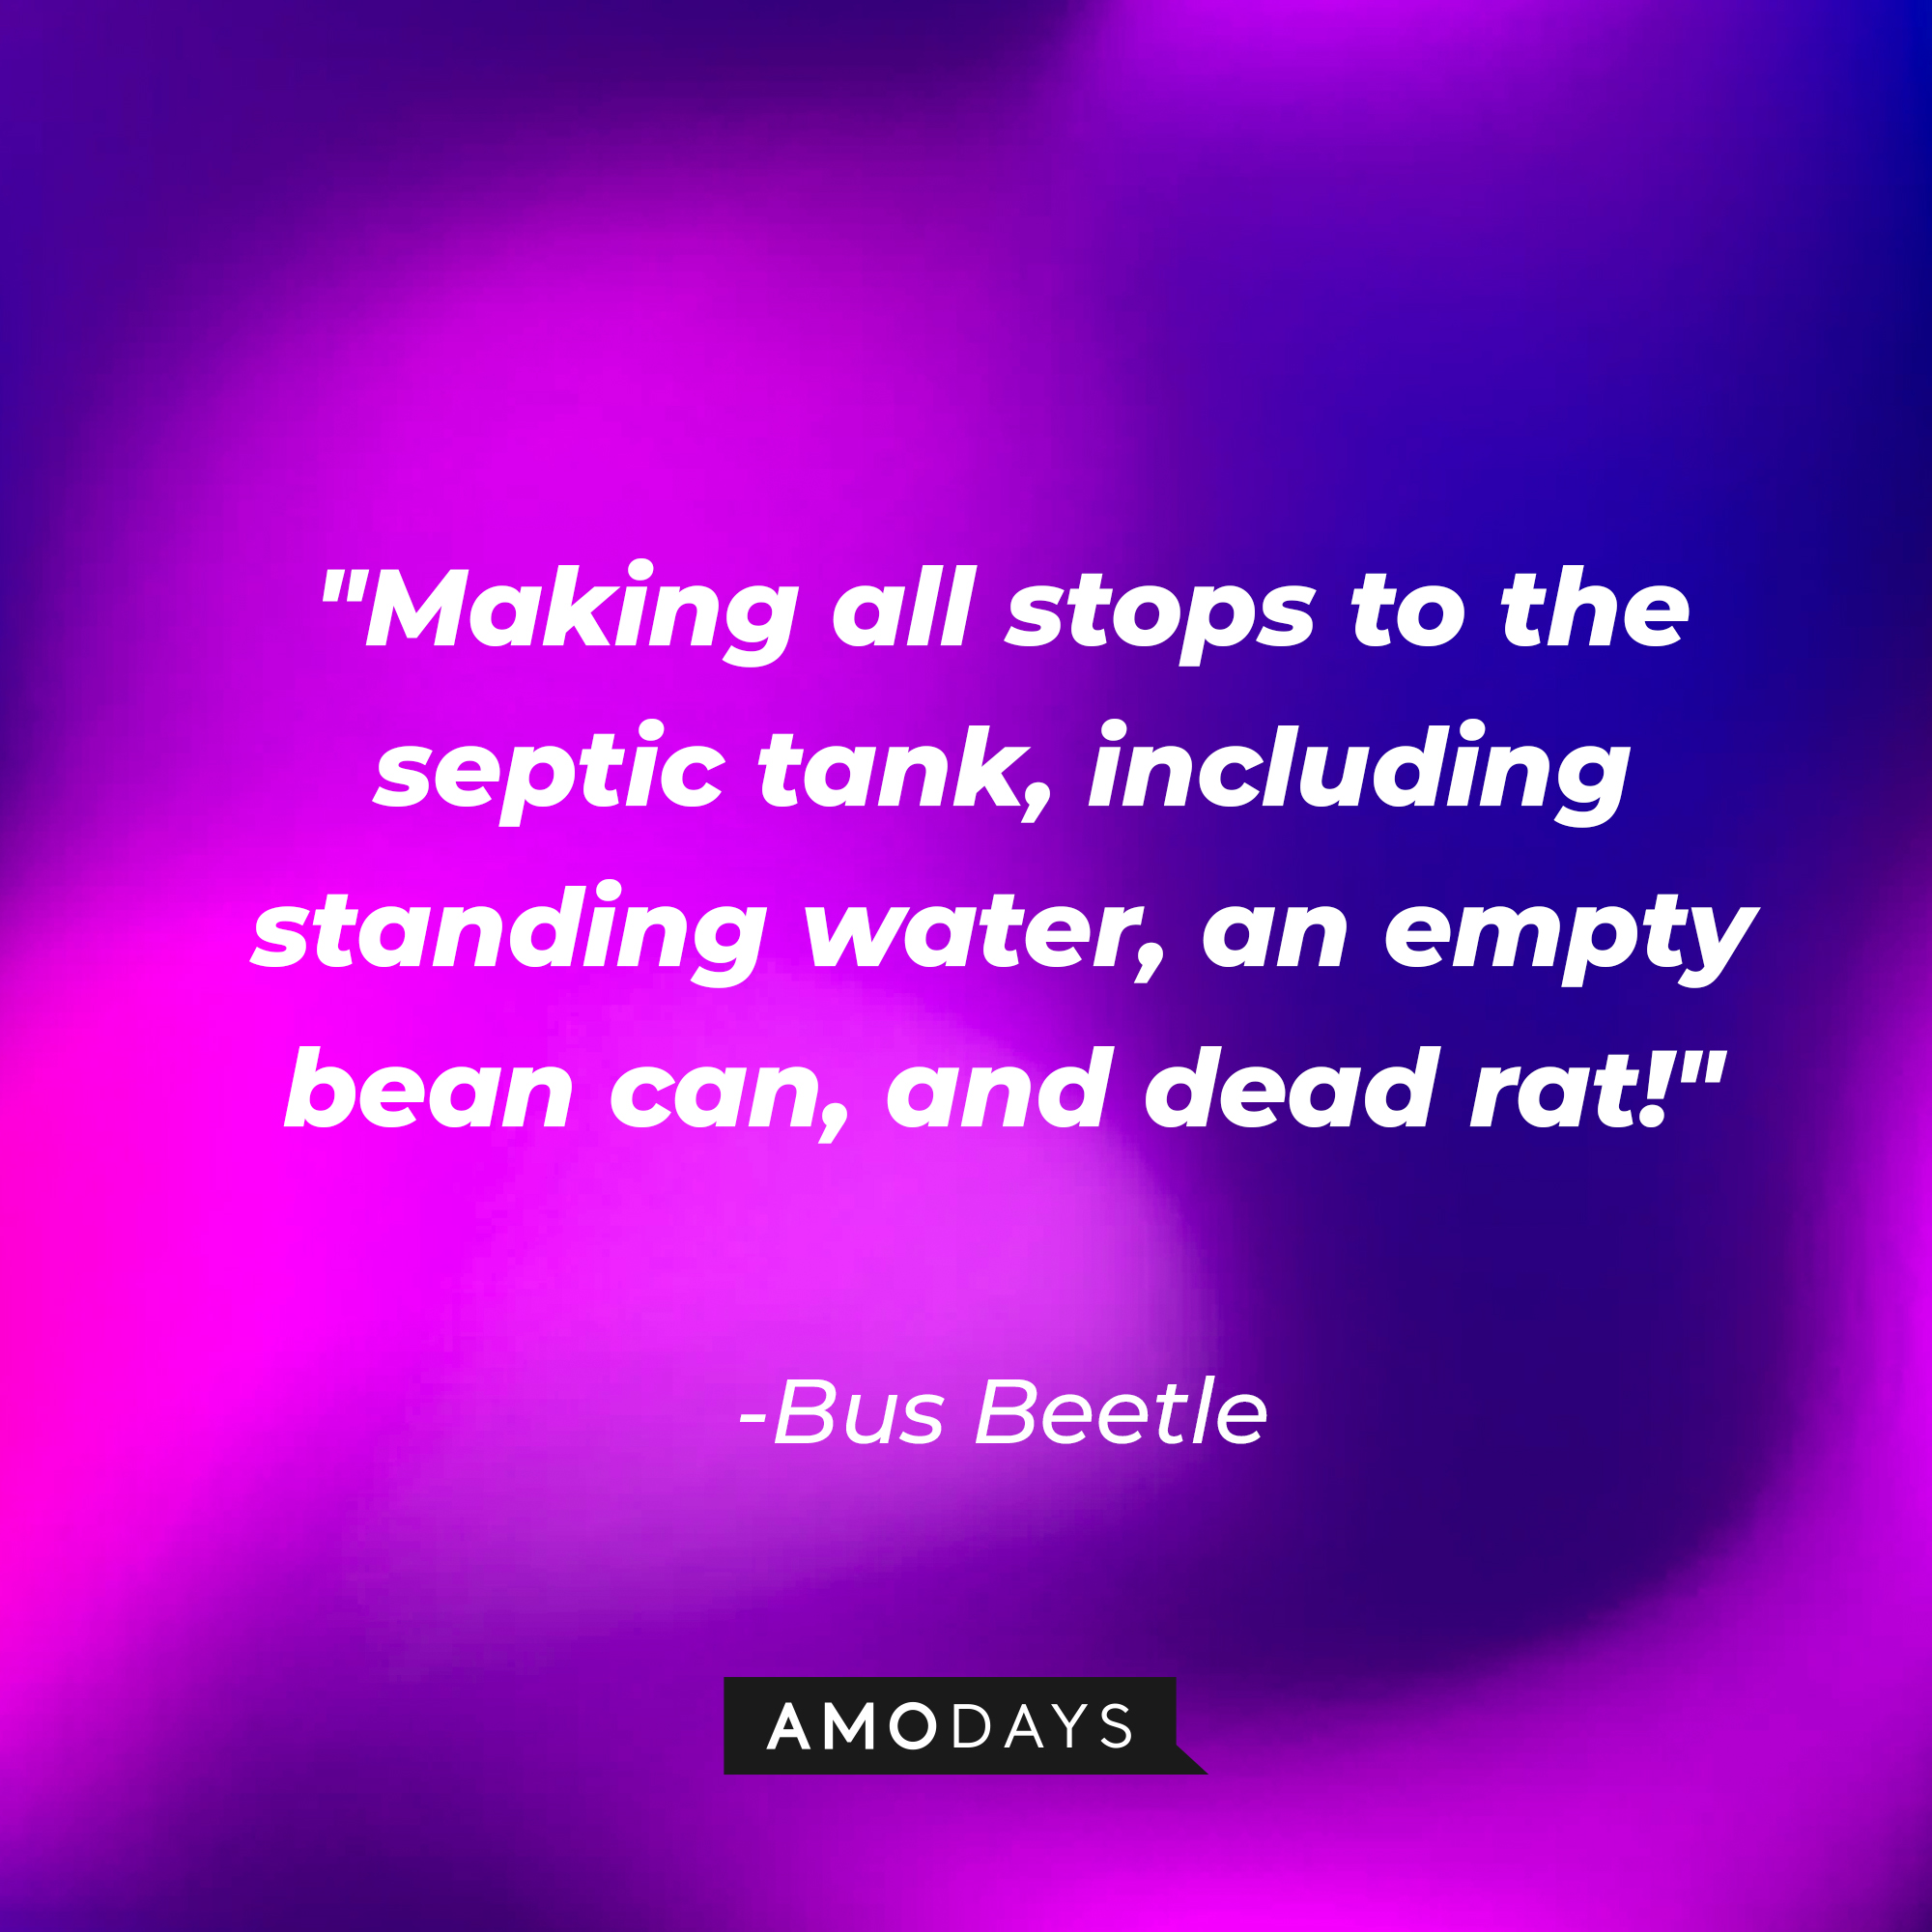 Bus Beetle's quote: "Making all stops to the septic tank, including standing water, an empty bean can, and dead rat!" | Source: AmoDays